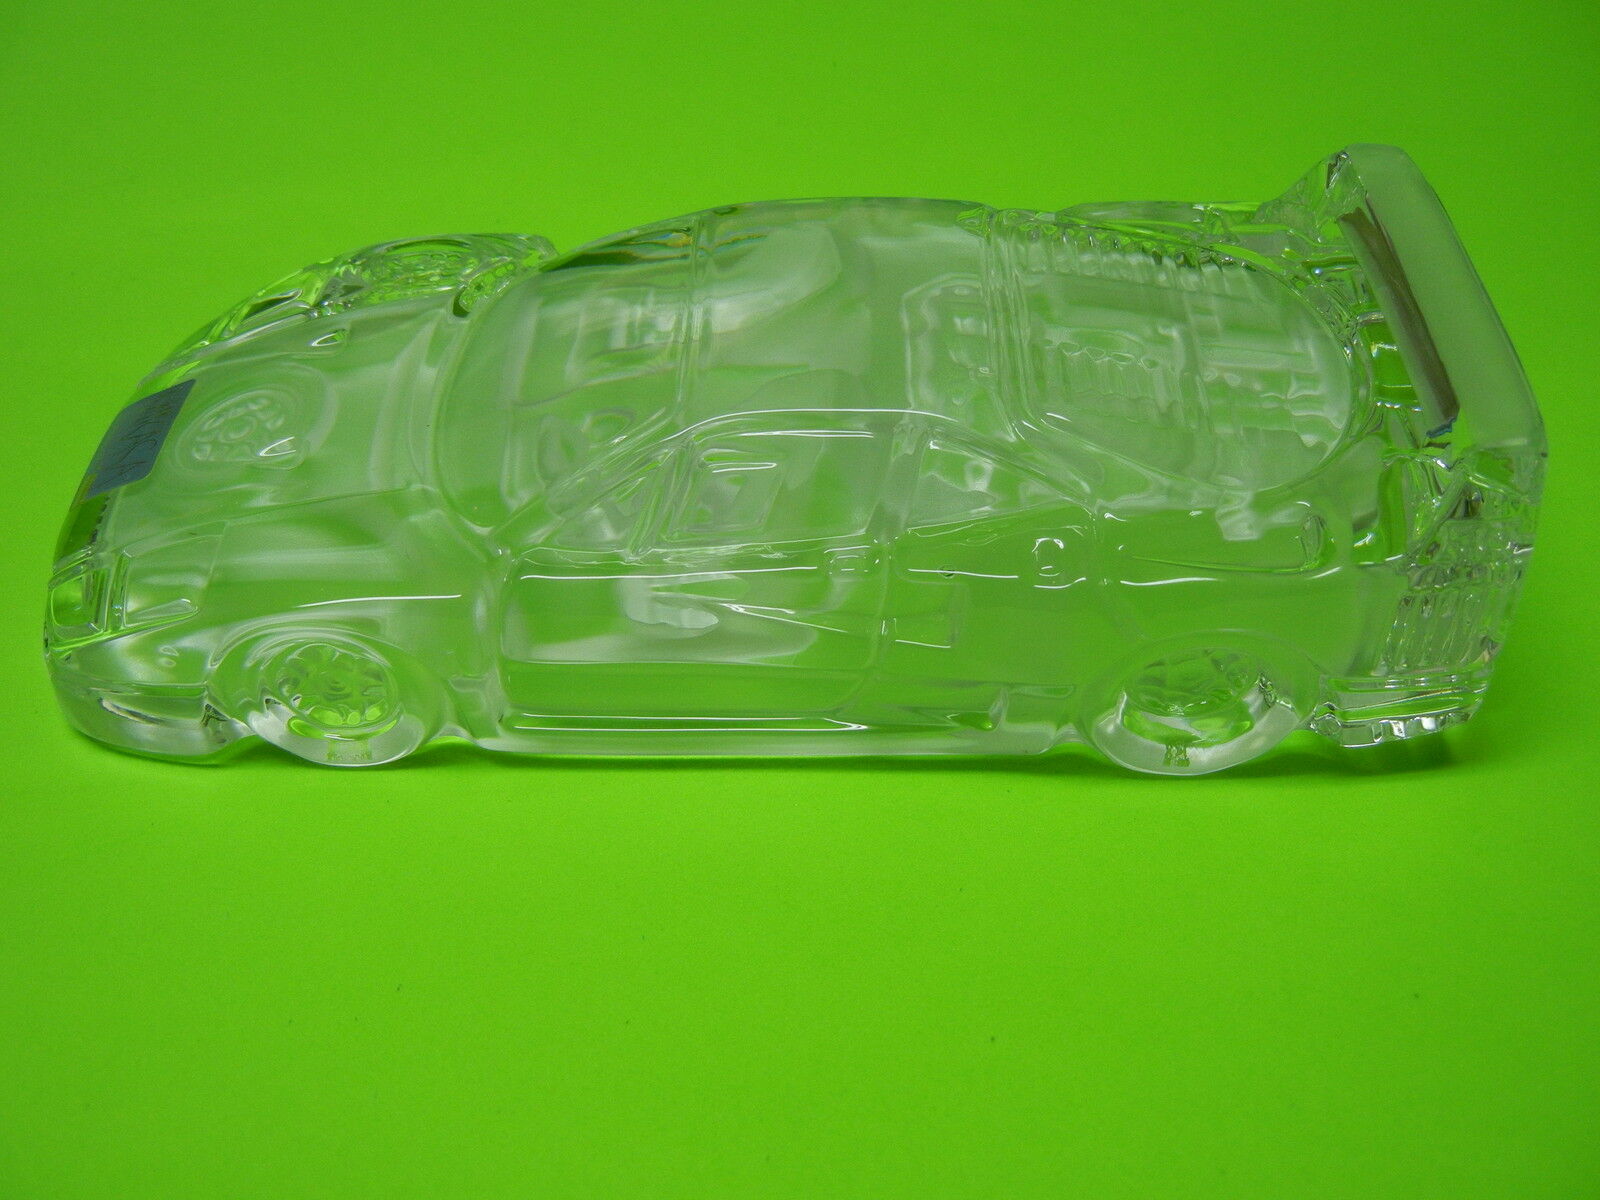 FERRARI F40 GLASS CRYSTAL CAR AUTOMOBILE PAPERWEIGHT IN EXCELLENT CONDITION